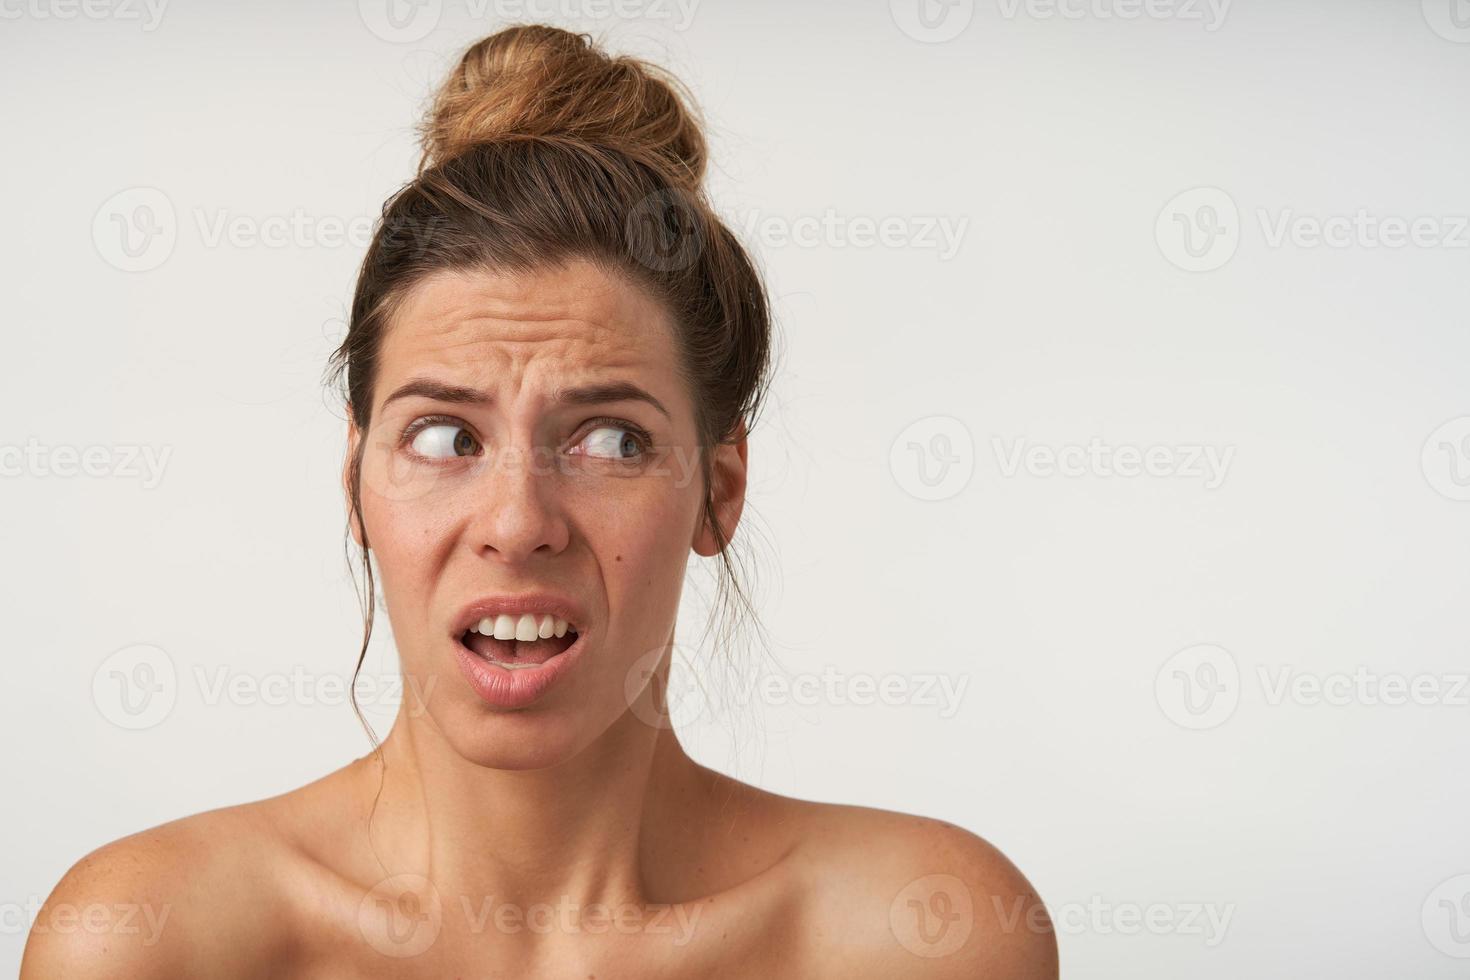 Head shot portrait of shocked frustrated young female with bun hairstyle, looking aside with astonished grimace, isolated over white background photo